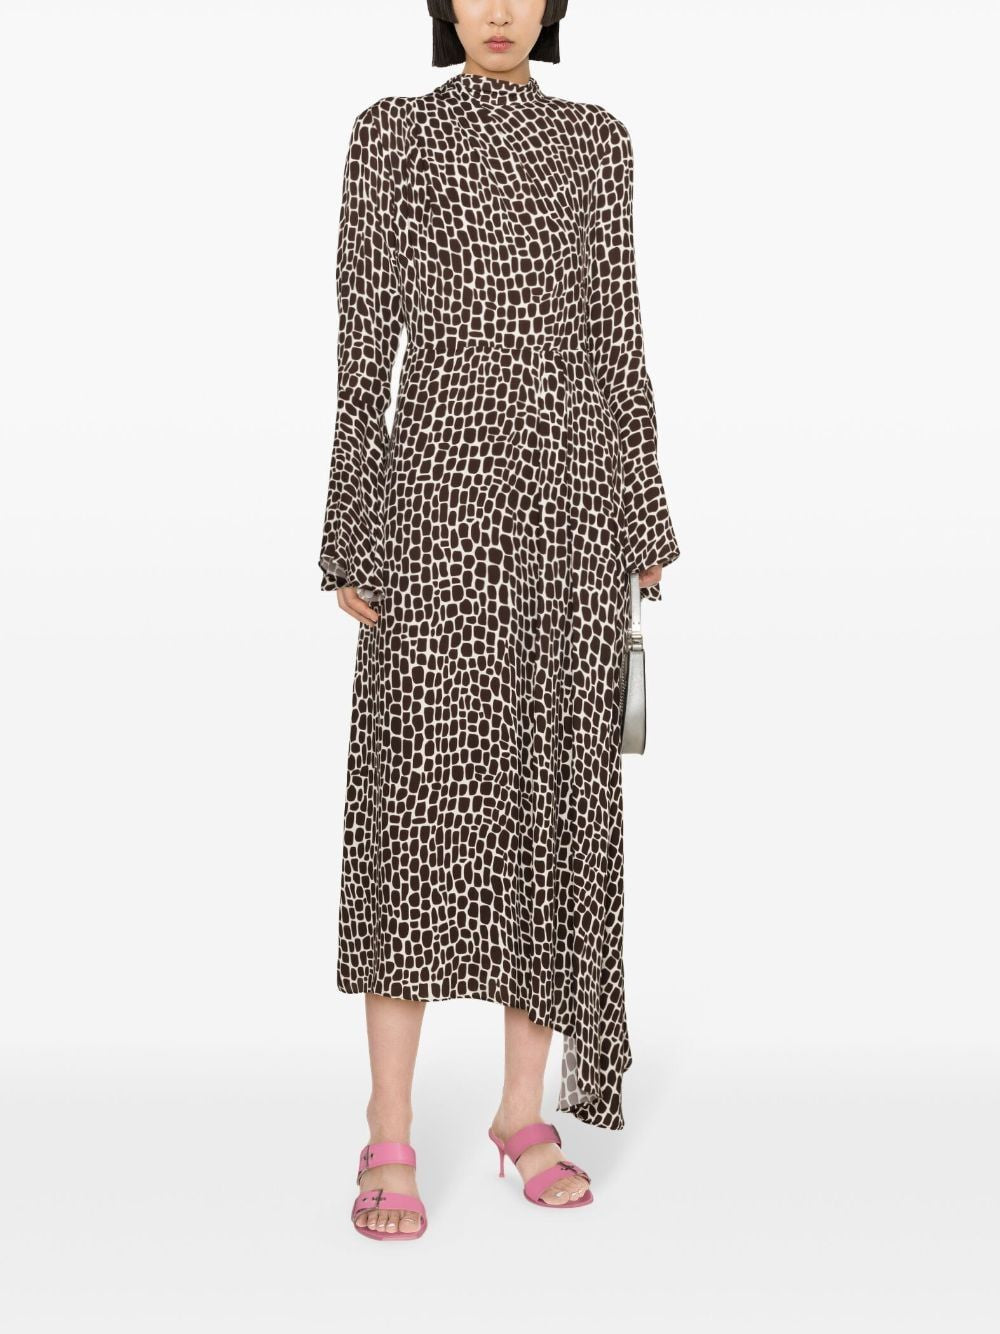 Off White Dress for Women by MSGM